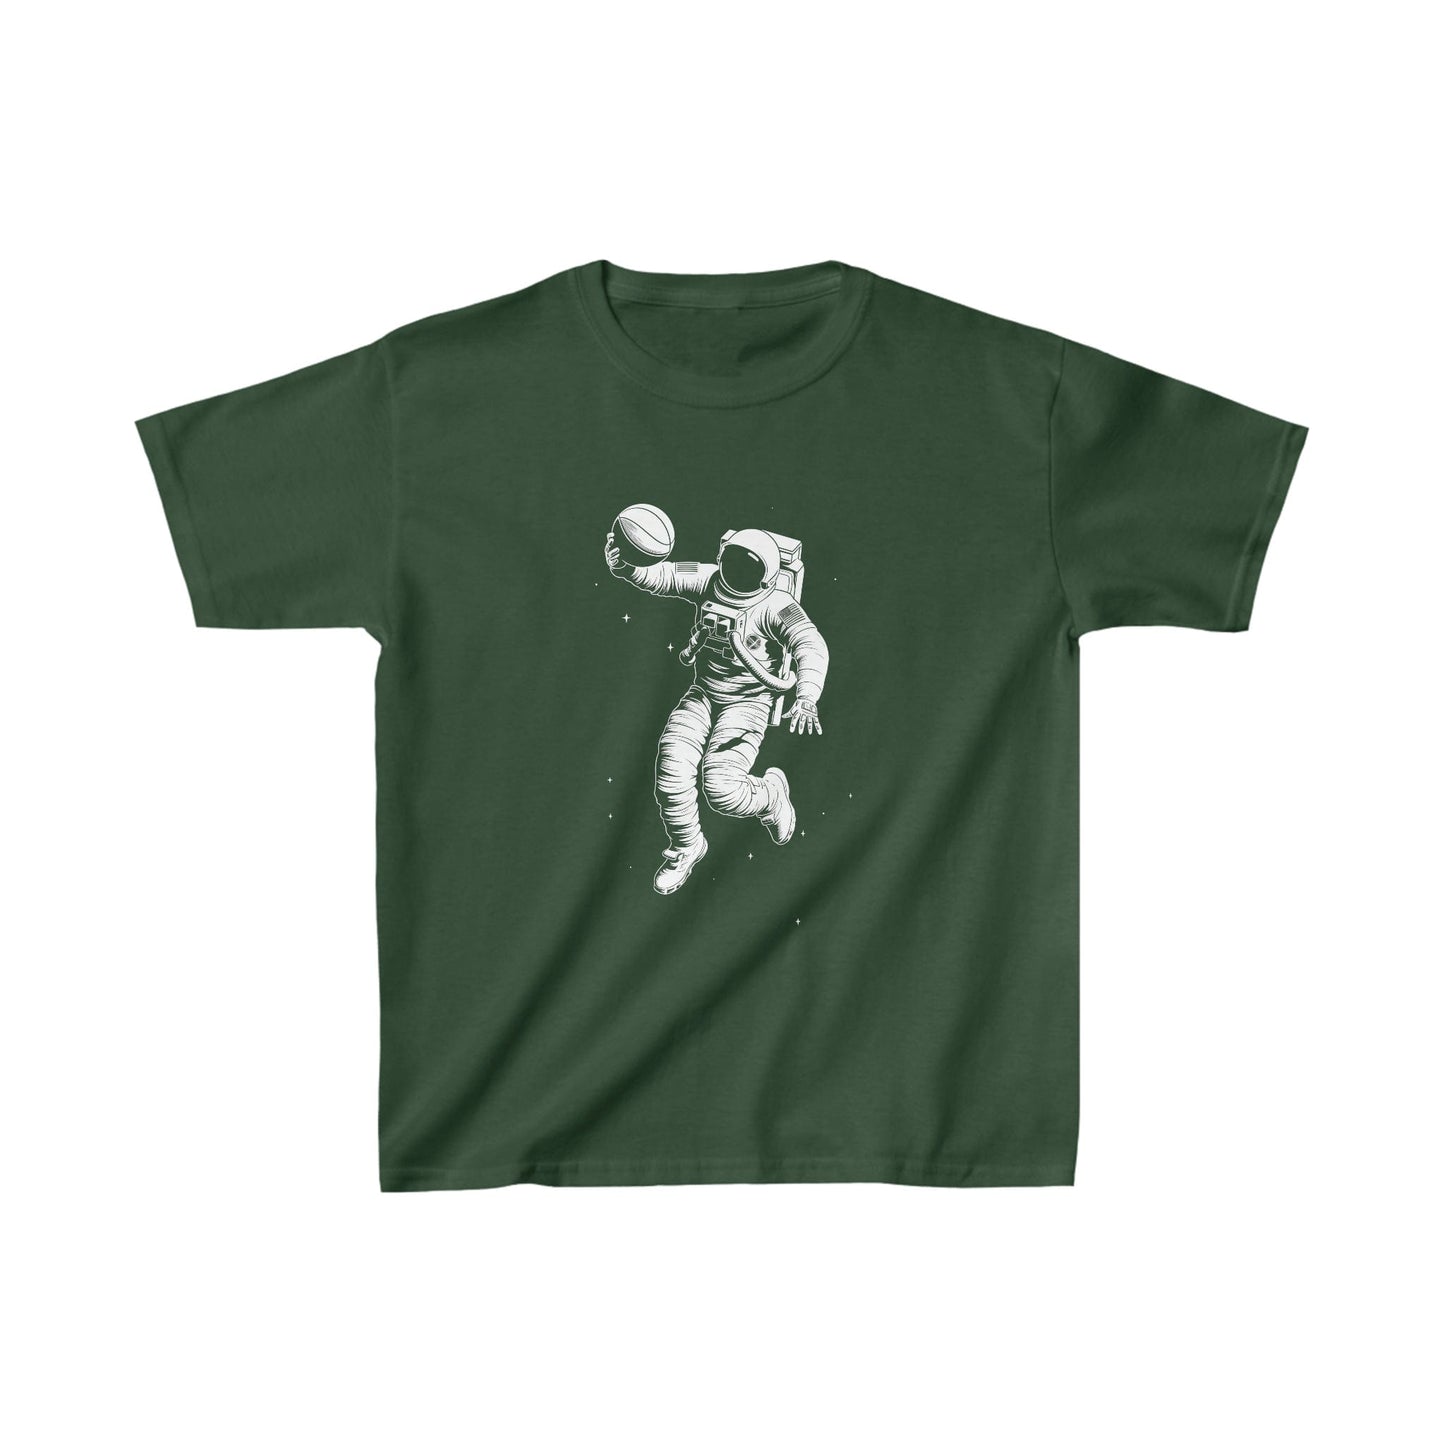 Kids clothes XS / Forest Green Youth Astronaut Basketball T-Shirt